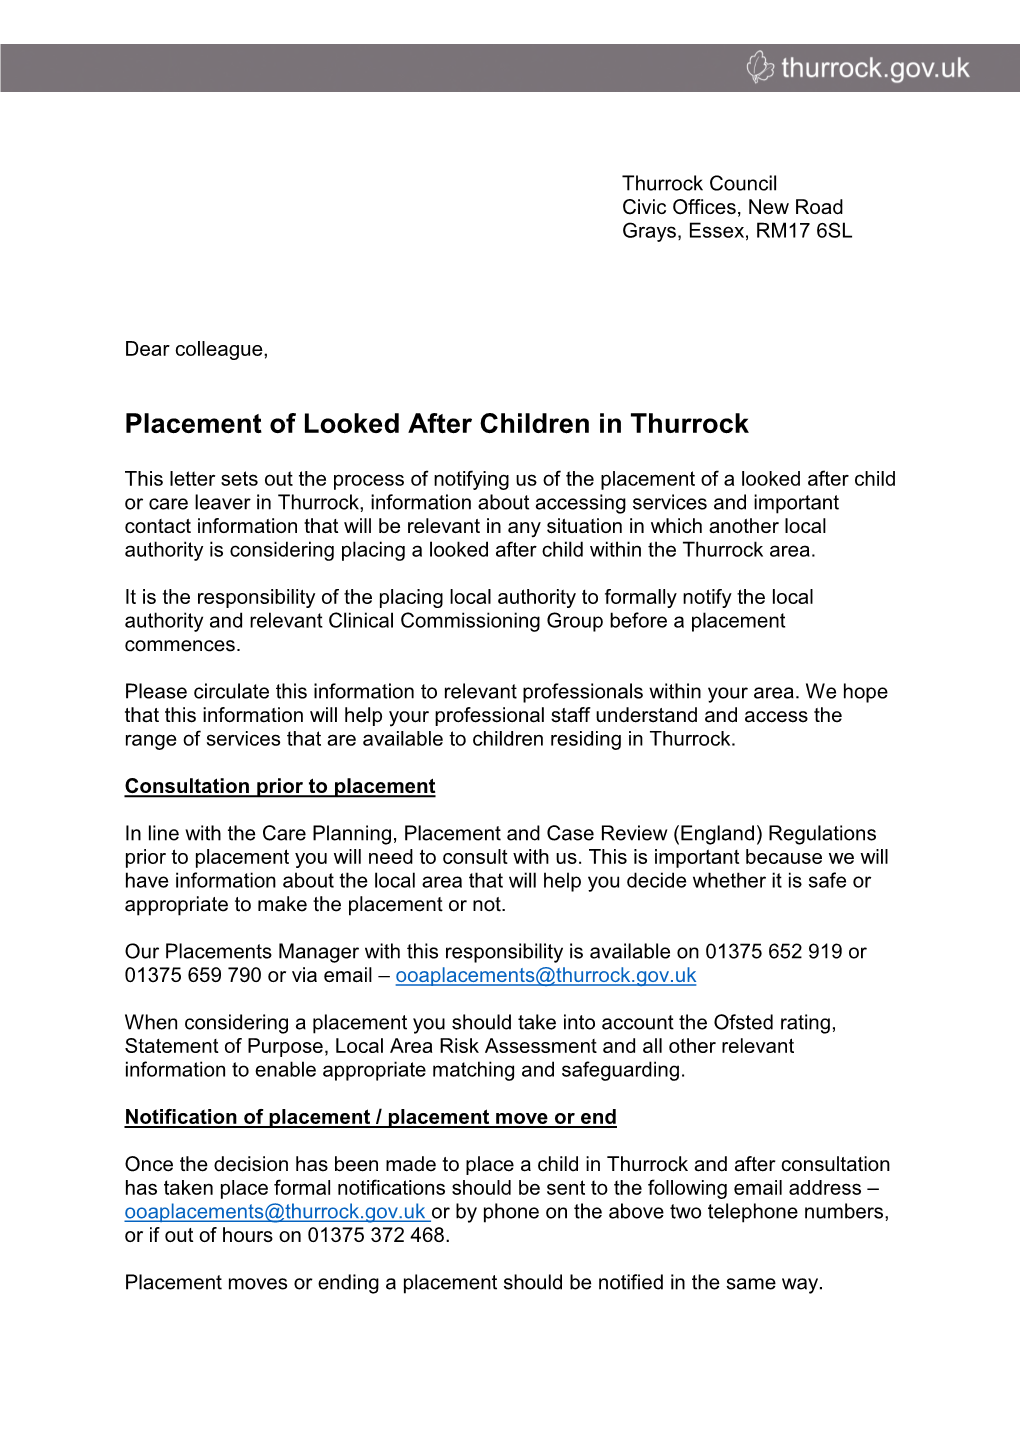 Placement of Looked After Children in Thurrock (Letter to Colleagues)